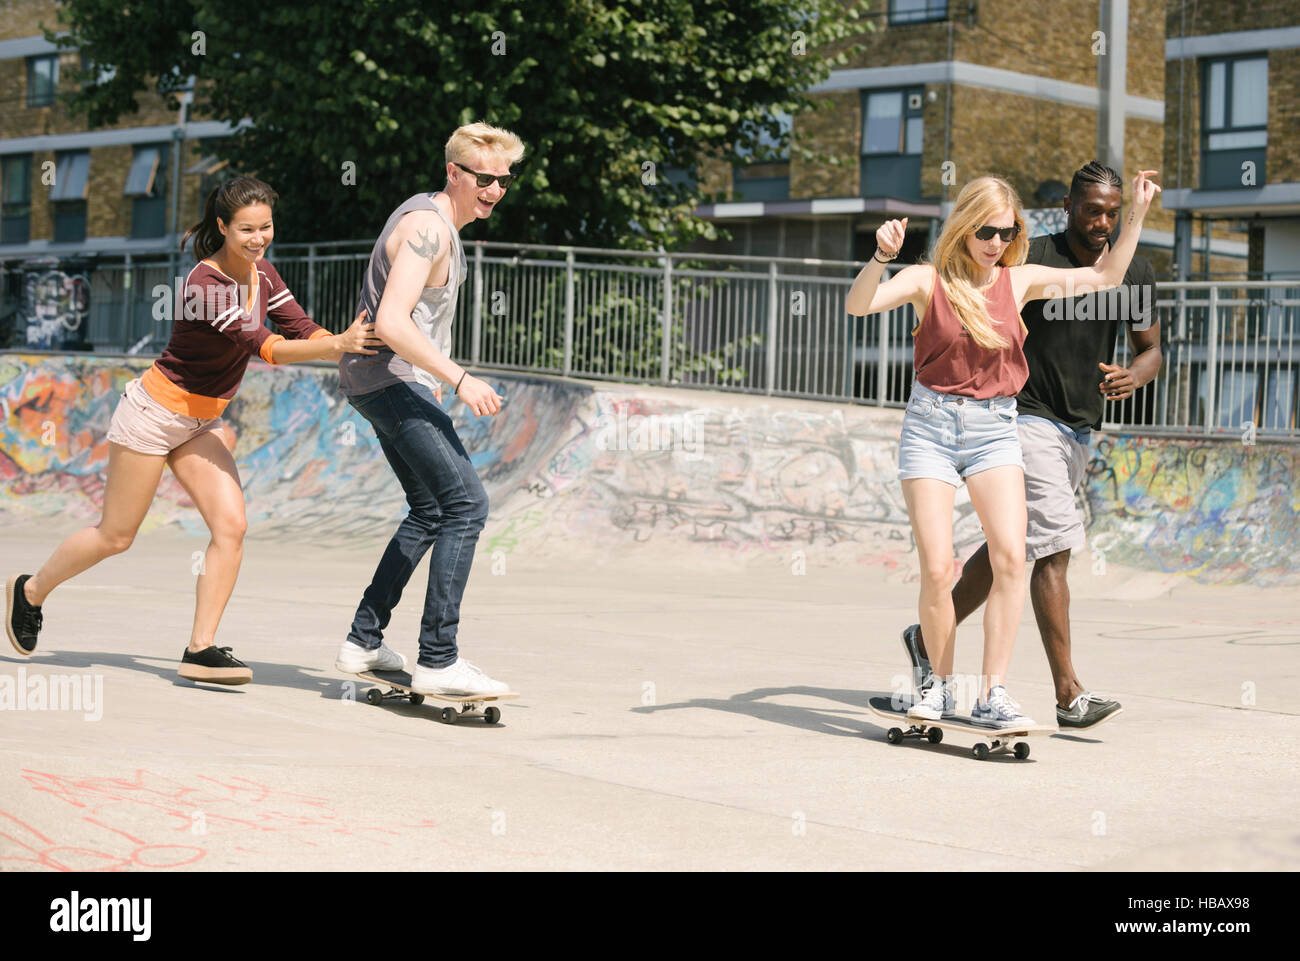 For adult friends learning to skateboard in skatepark Stock Photo - Alamy